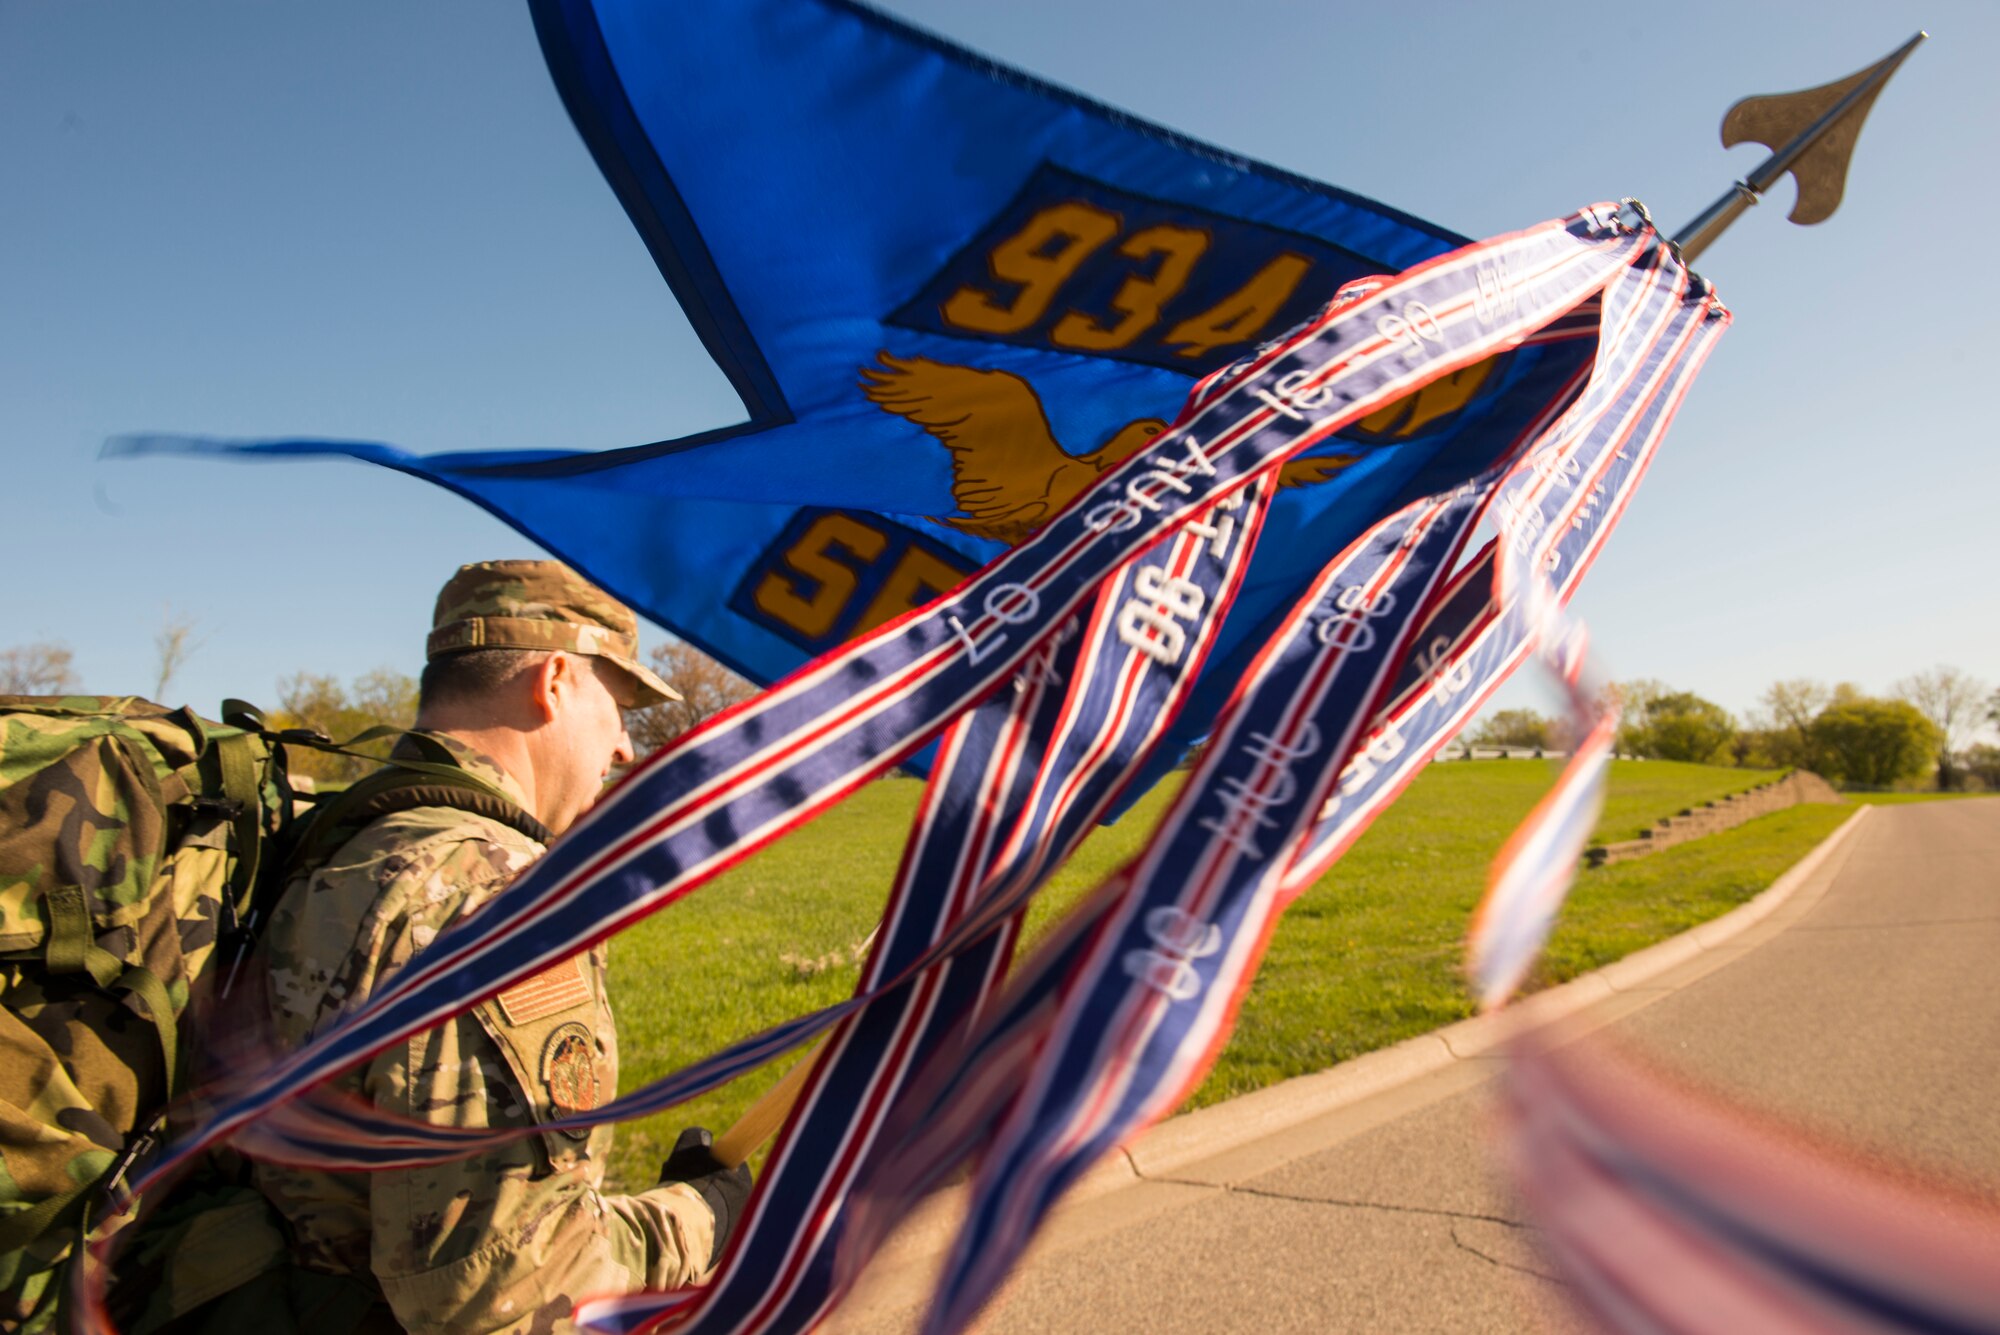 Master Sgt. Glen Kramlinger, 934th Security Forces Squadron plans and programs manger, holds the 934 SFS guidon during a 4.5 mile ruck march in support of the Resolute Defender Ruck Challenge at Minneapolis-St. Paul Air Reserve Station, April 30, 2021. The intent for this 12 month challenge is to build and solidify resiliency, camaraderie, and communication. Currently, 40 Airmen and civilians, comprising 19 different teams, are taking part in the challenge. (Air Force photo by Chris Farley)